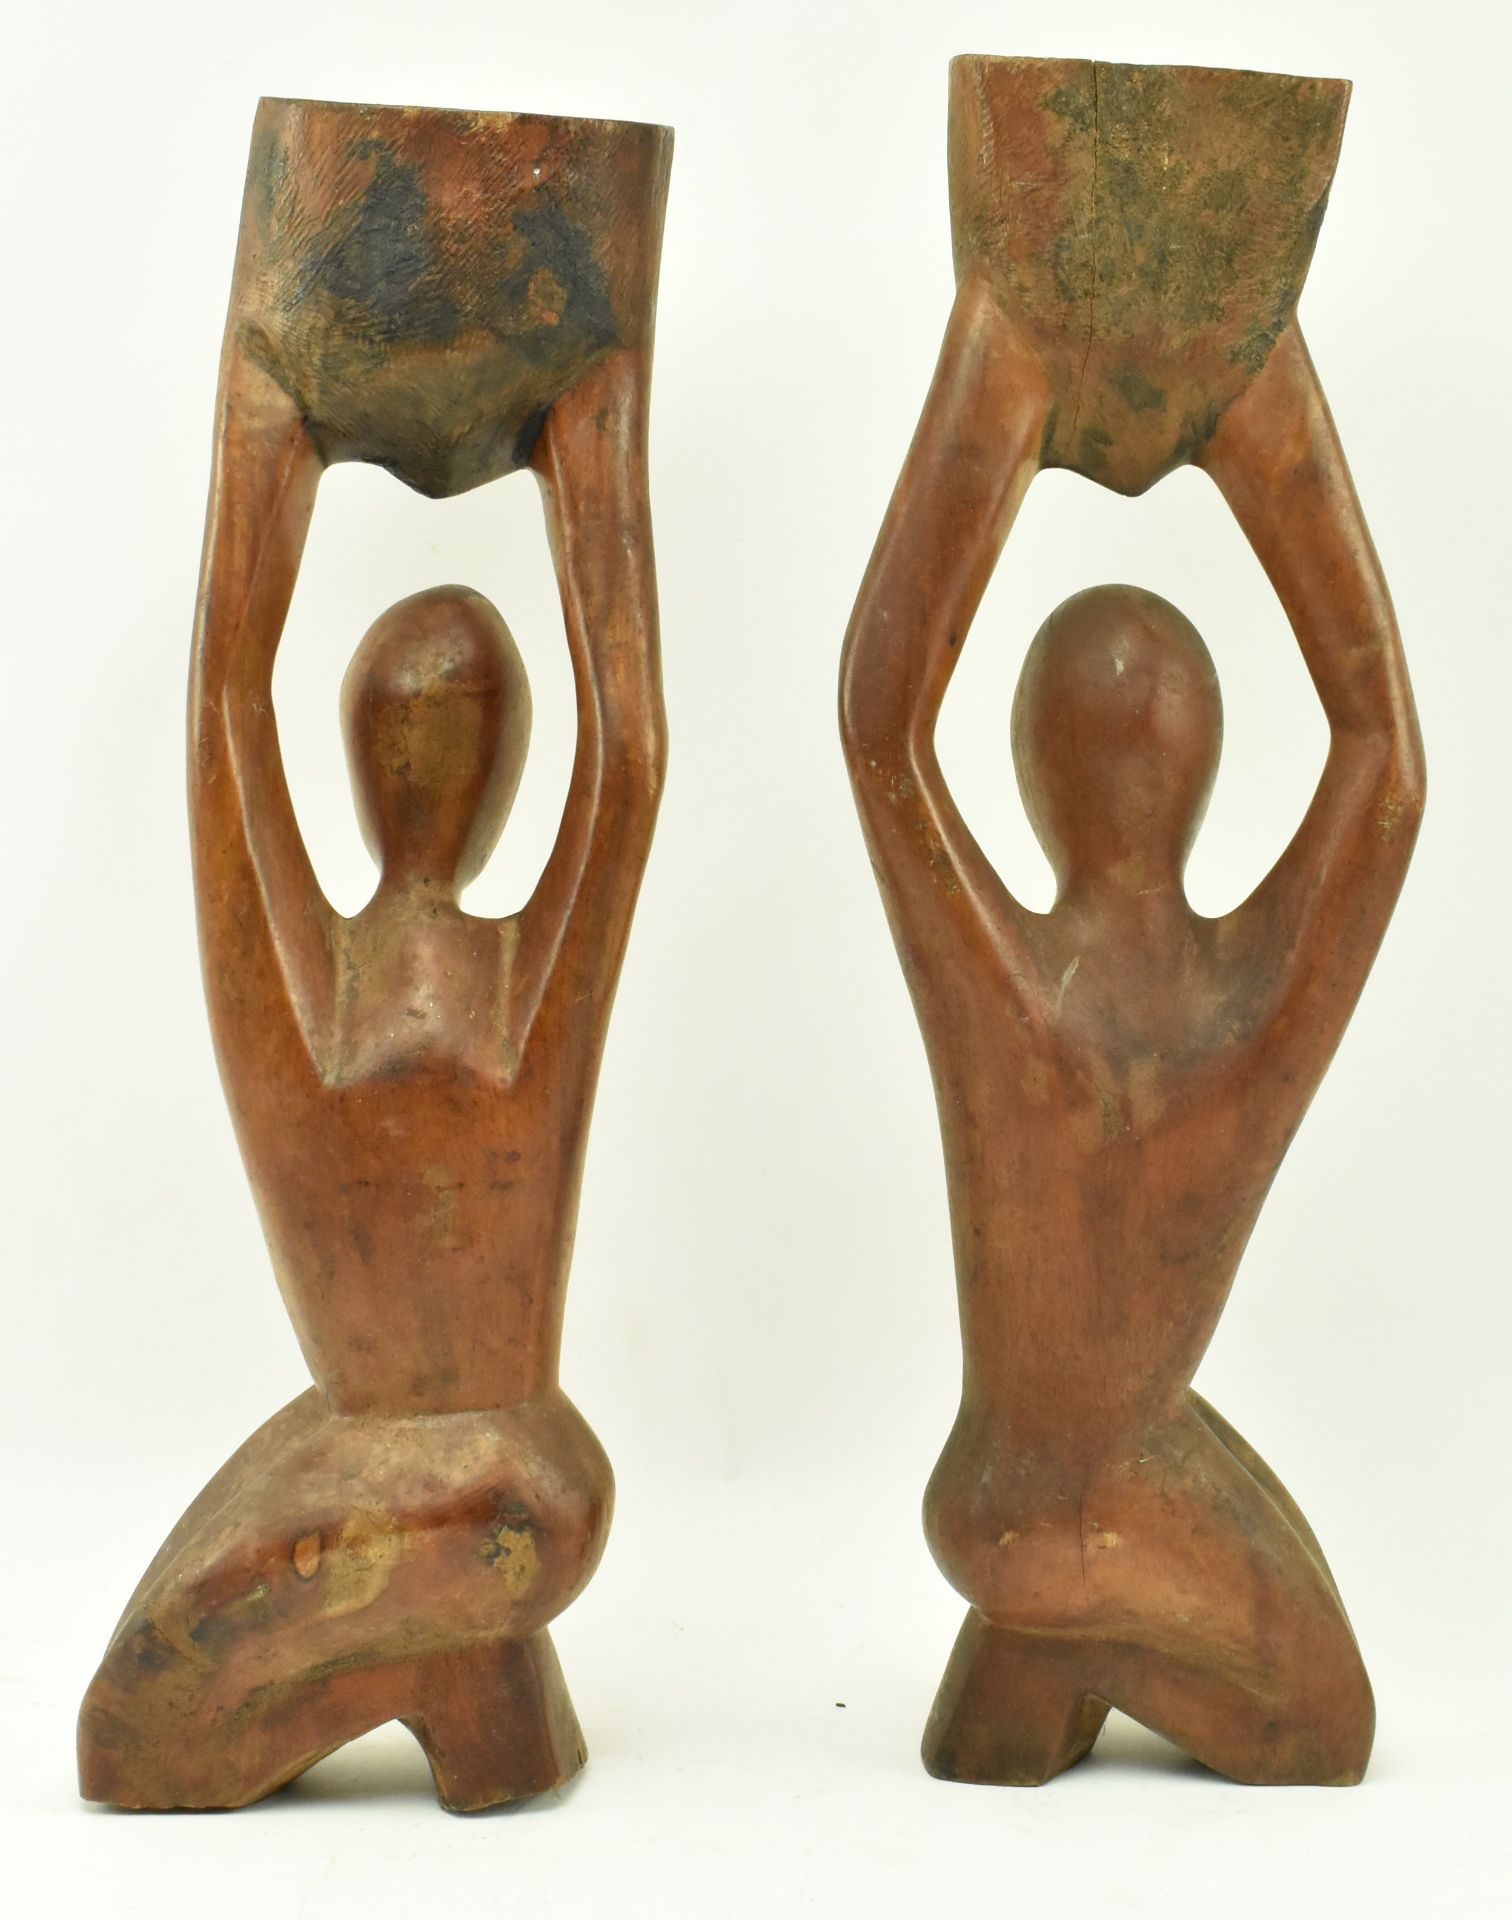 PAIR OF HAND CARVED WOOD DECORATIVE FIGURES STANDS - Image 3 of 6